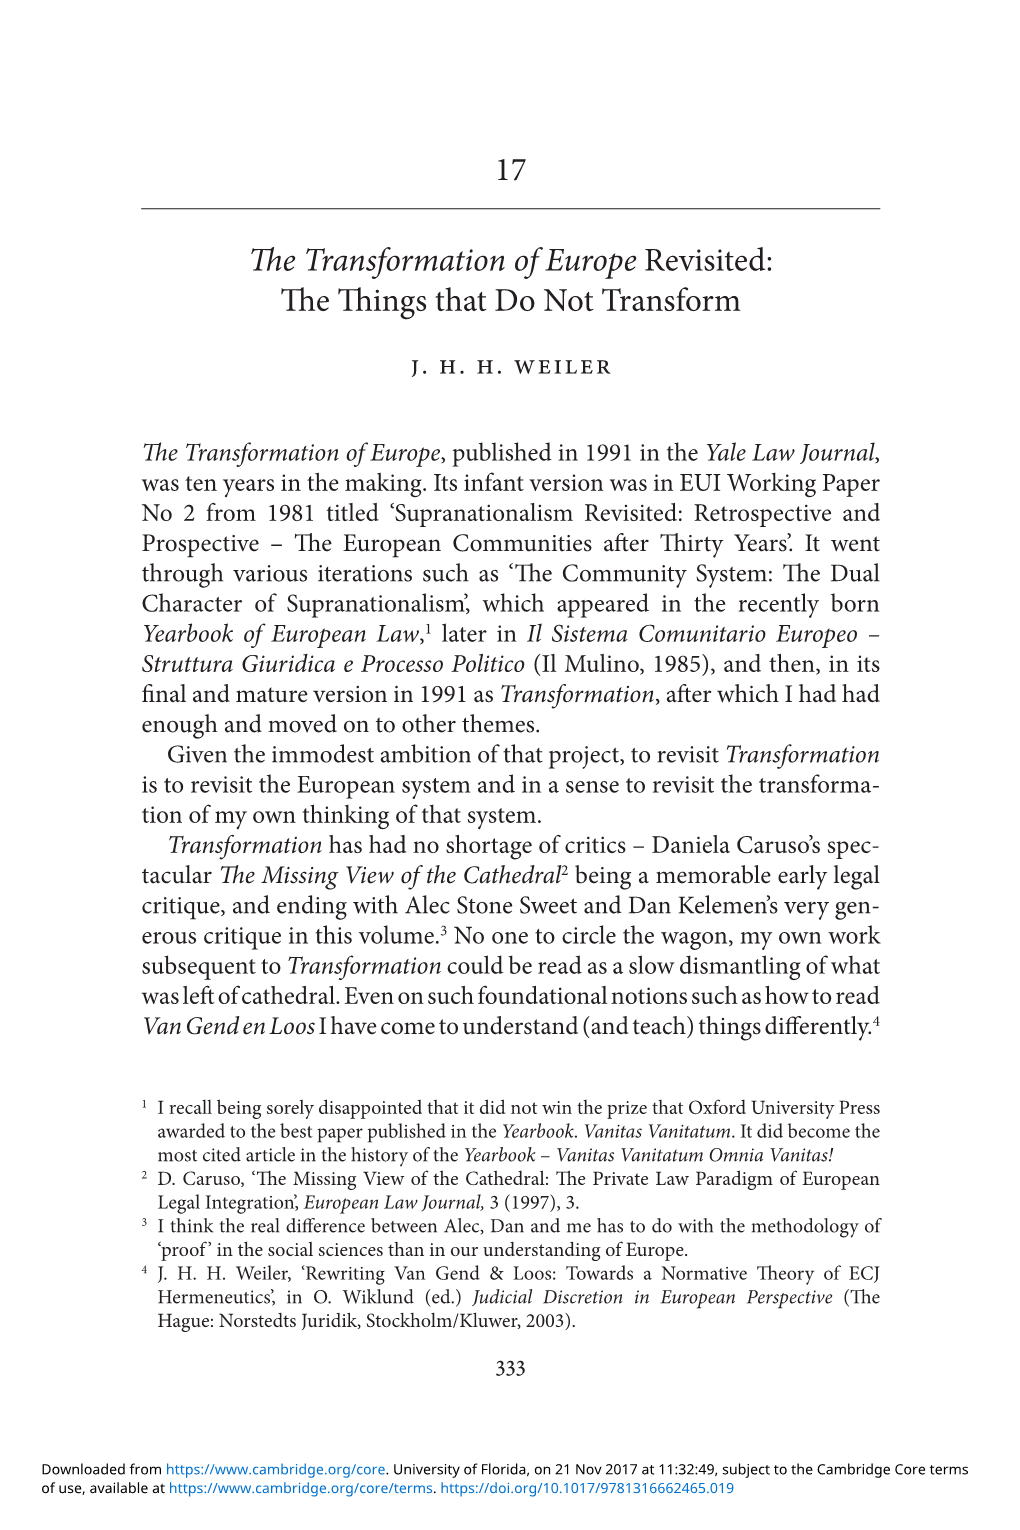 17 the Transformation of Europe Revisited: the Things That Do Not